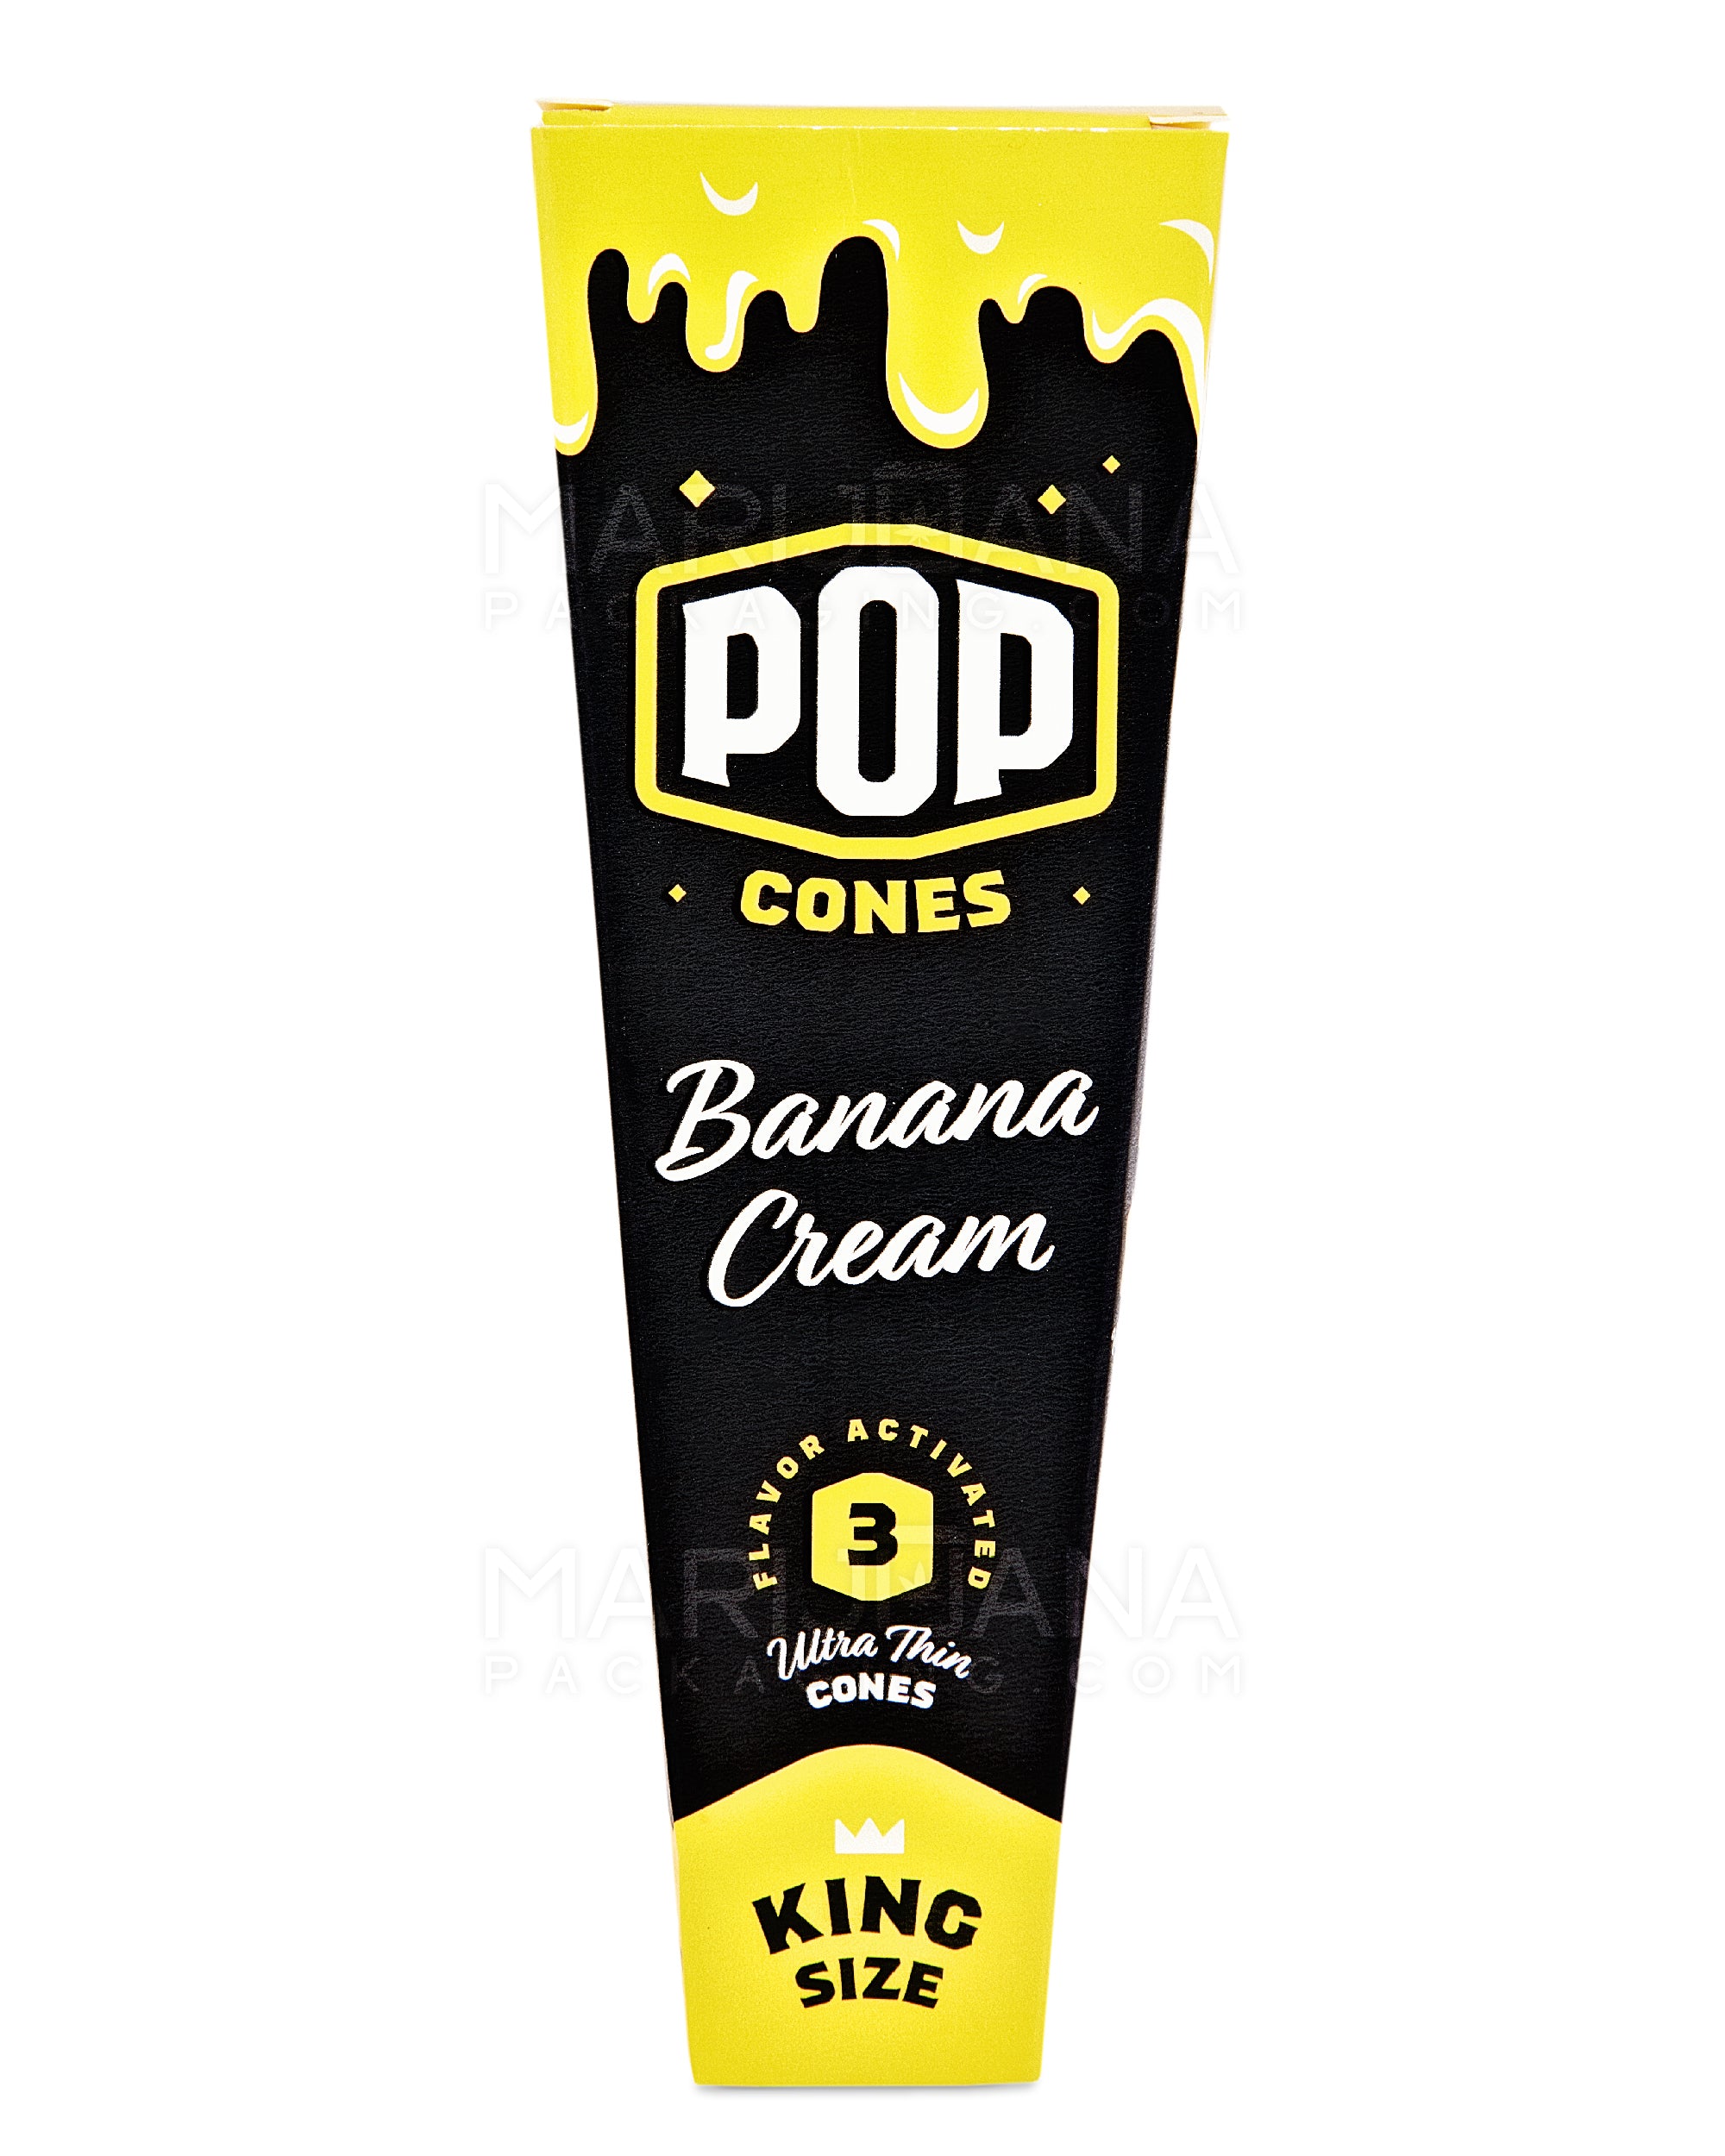 POP CONES | 'Retail Display' King Size Pre-Rolled Cones | 109mm - Banana Cream - 24 Count - 2